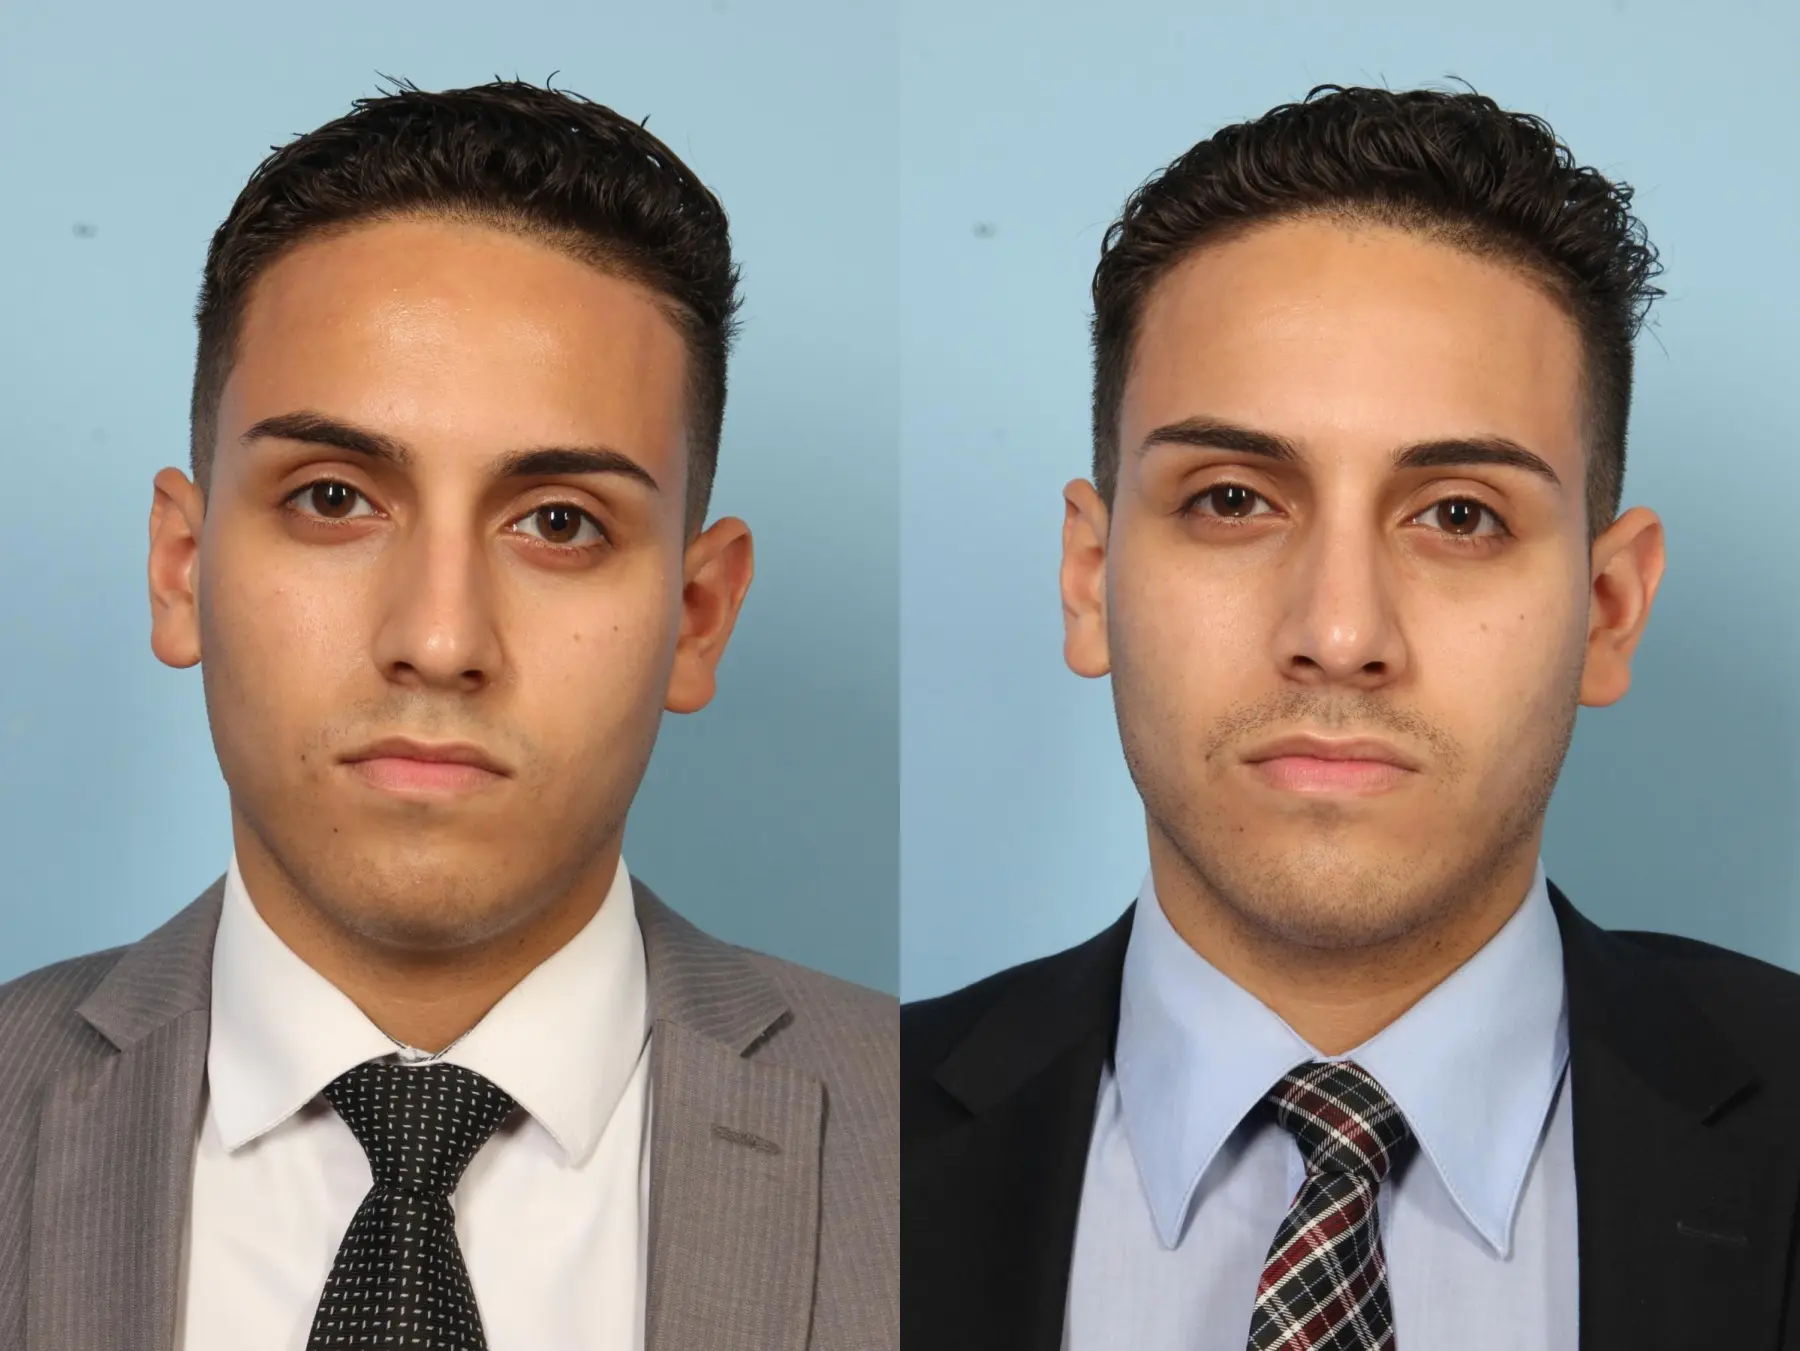 Rhinoplasty: Patient 1 - Before and After 1